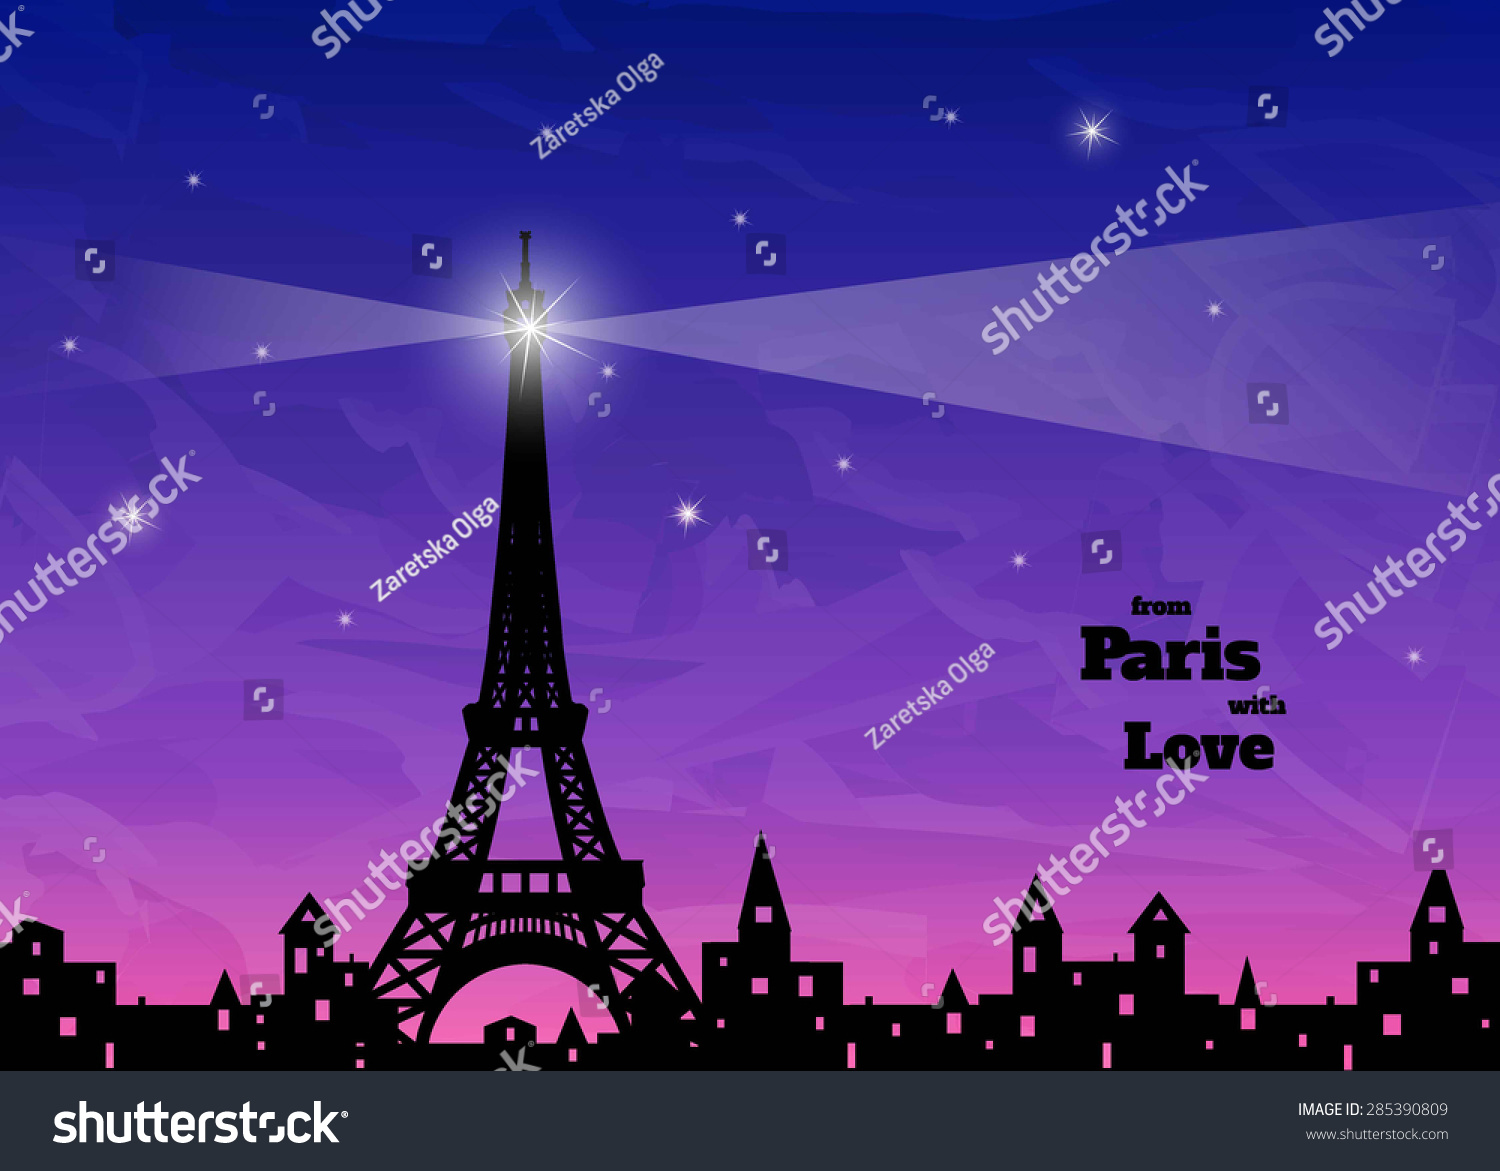 Big Star With Rays On Silhouette Of Eiffel Tower, Old Town With Holey ...